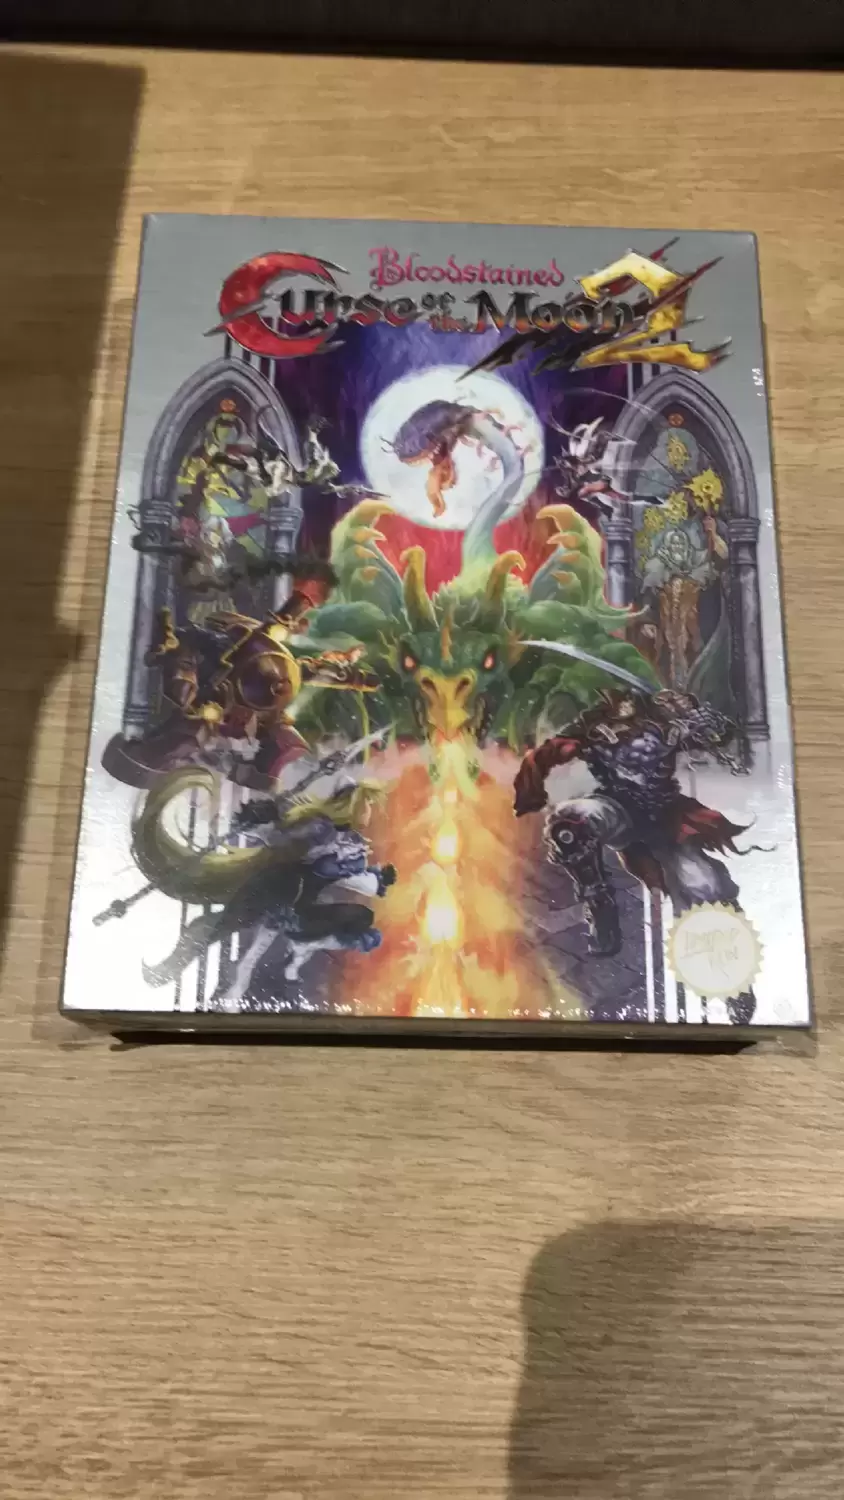 PS4 Games - Bloodstained: Curse of the Moon 2 Classic Edition - Limited Run Games